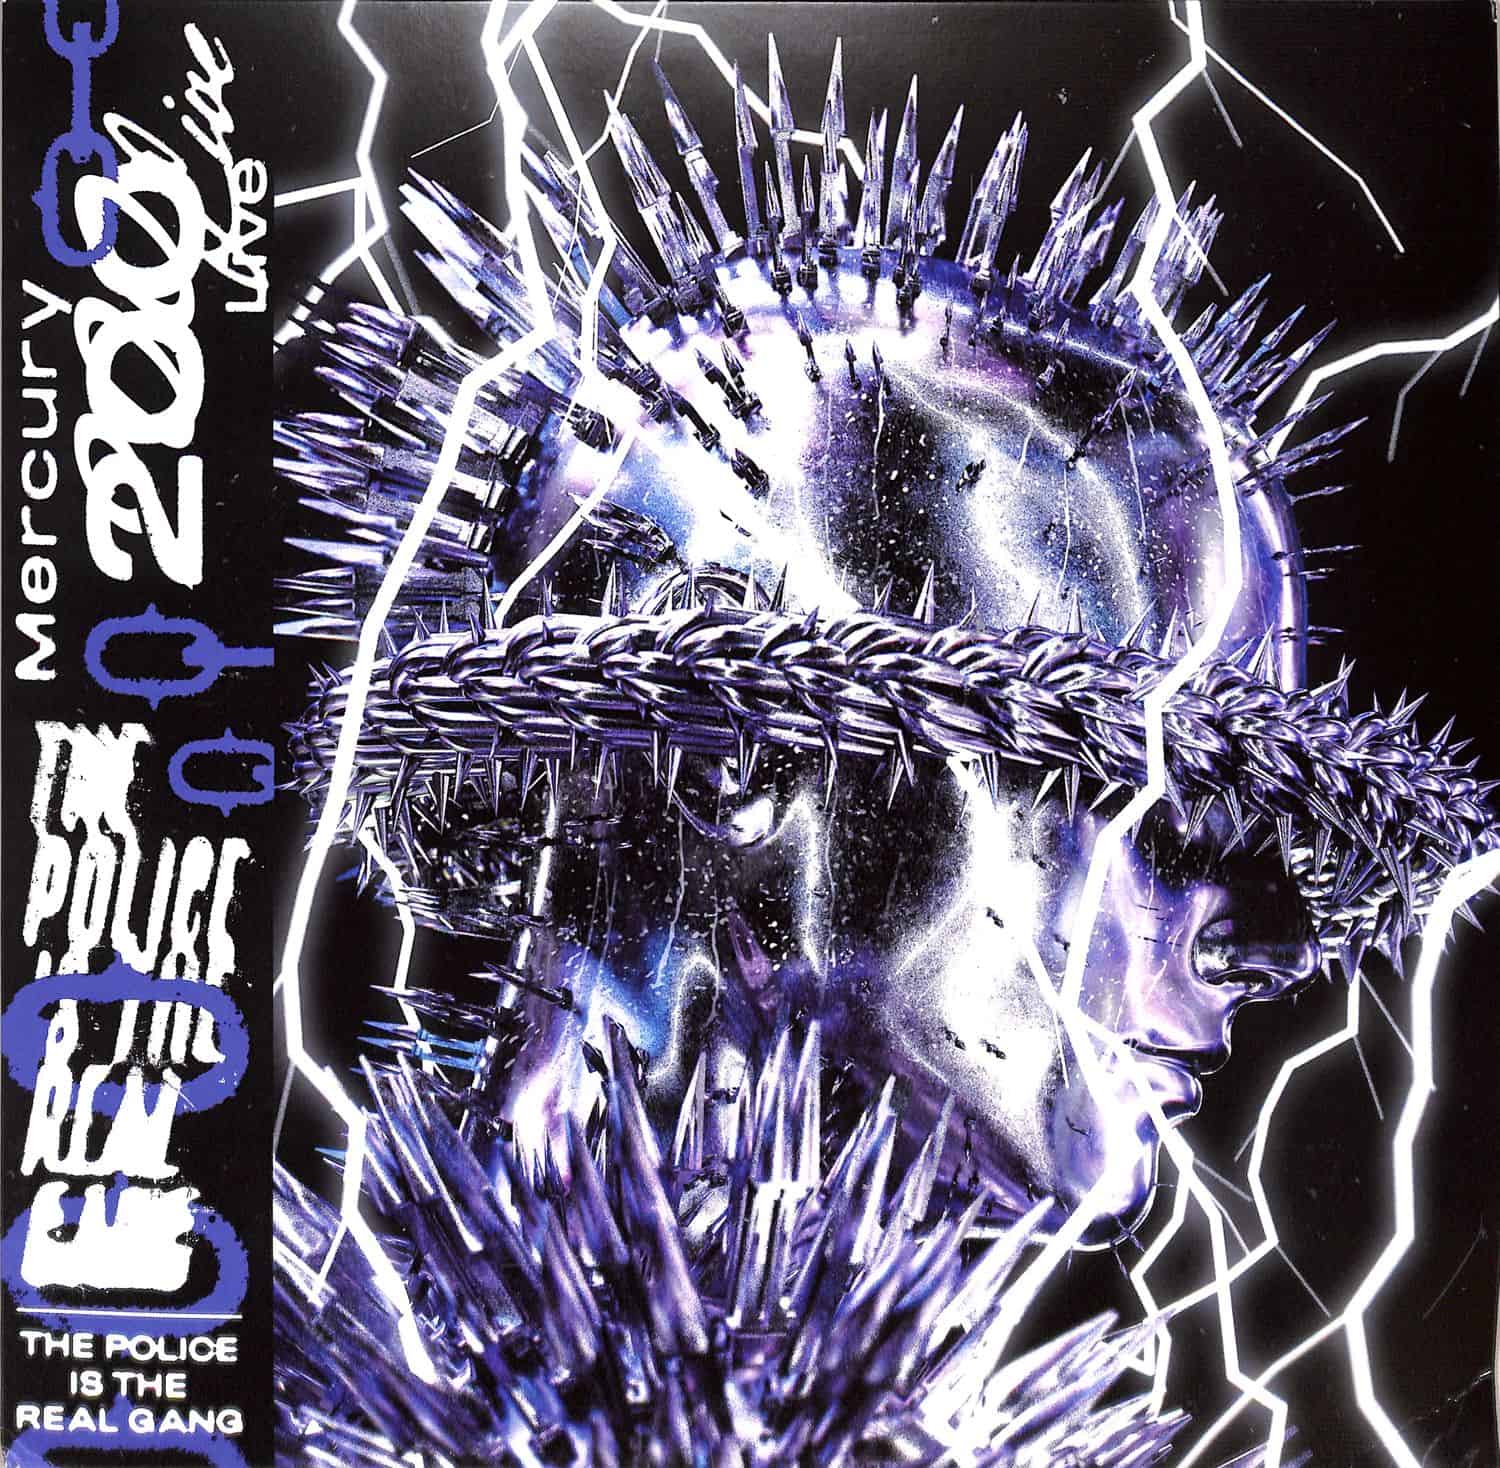 Mercury 200 - POLICE IS THE REAL GANG